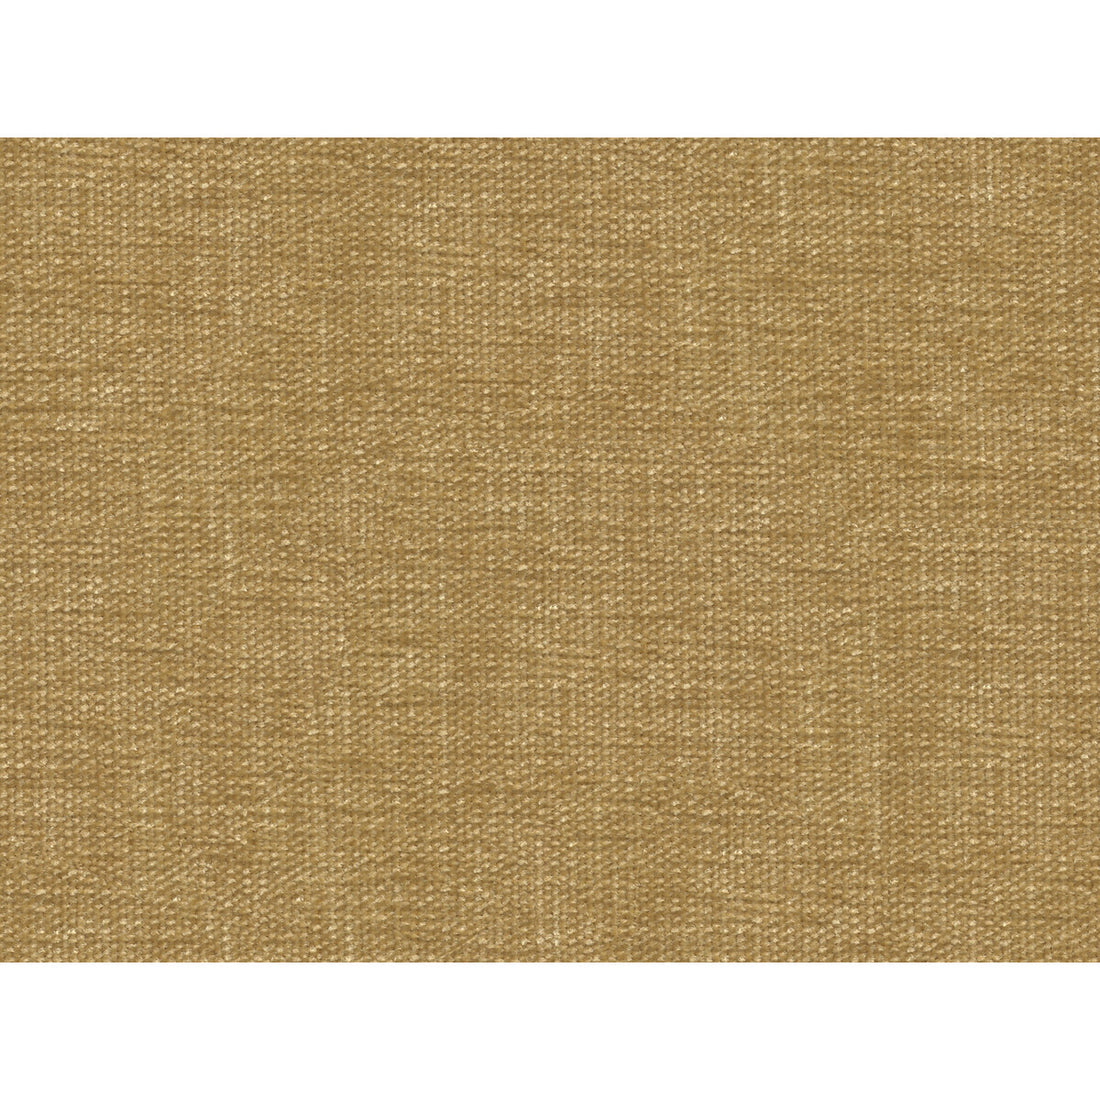 Kravet Contract fabric in 34961-416 color - pattern 34961.416.0 - by Kravet Contract in the Performance Kravetarmor collection